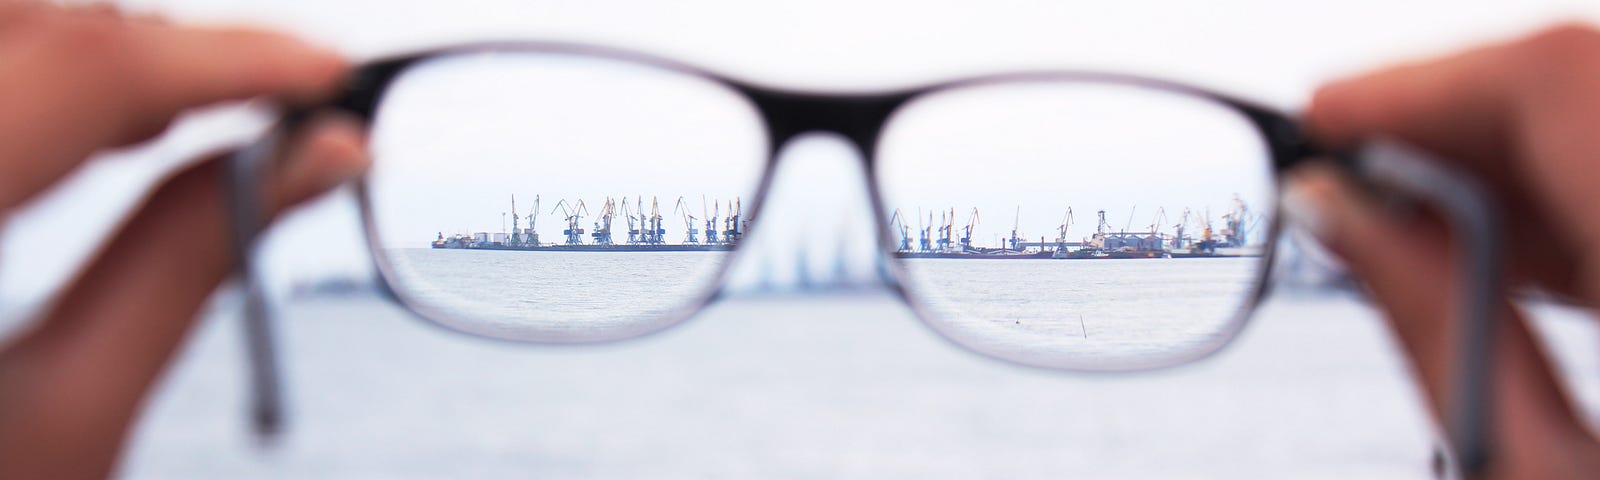 Holding glasses up to see a skyline. The focus is clear in the lenses of the glasses.